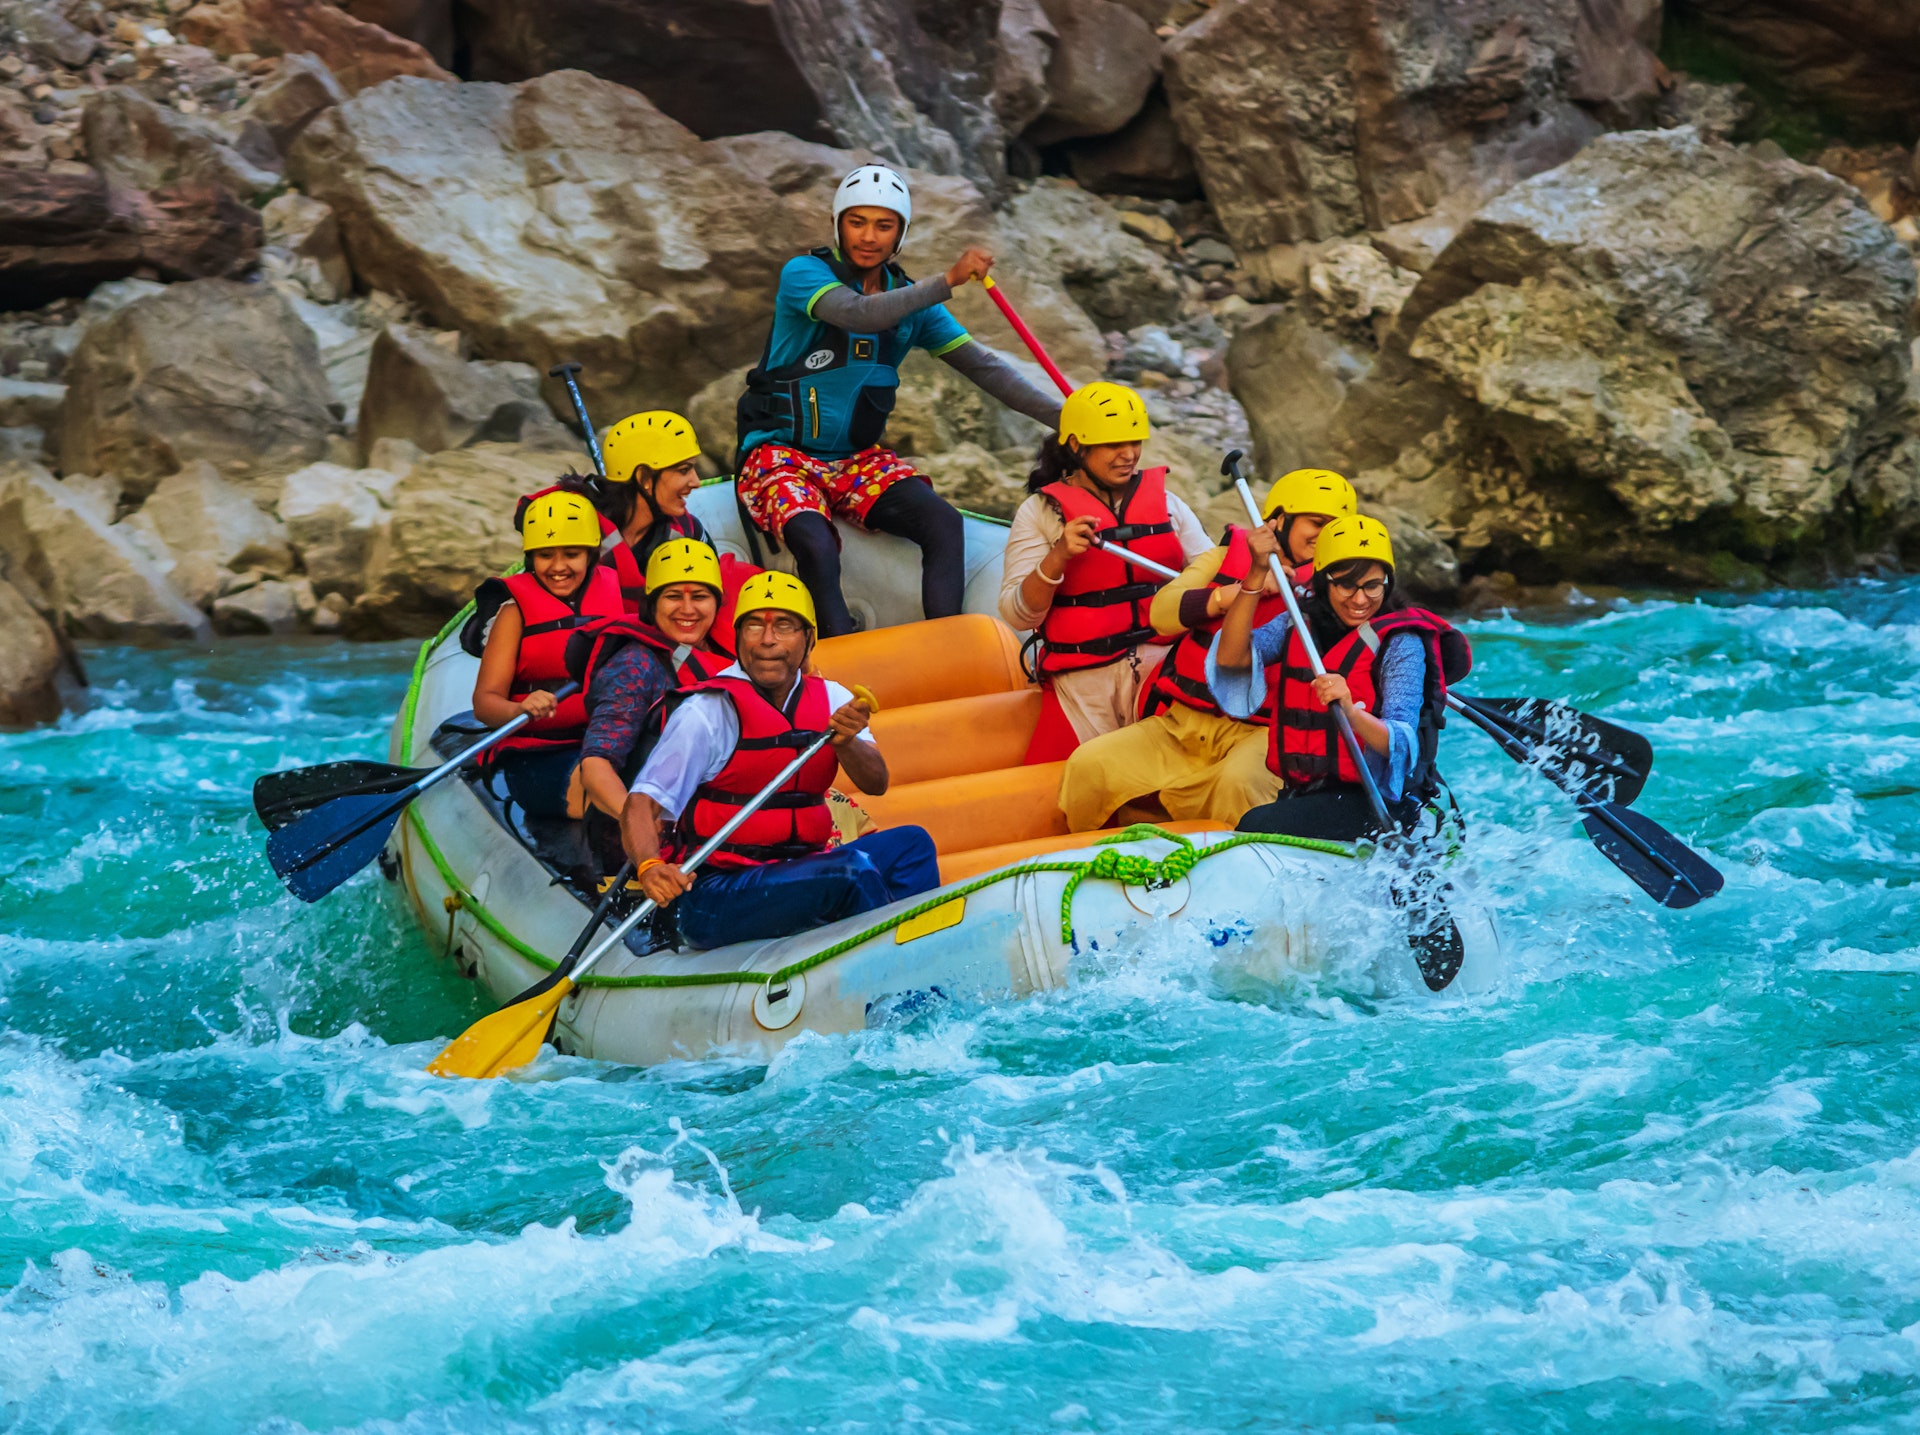 People smiling as they face the challenge of white water rapids in a small boat